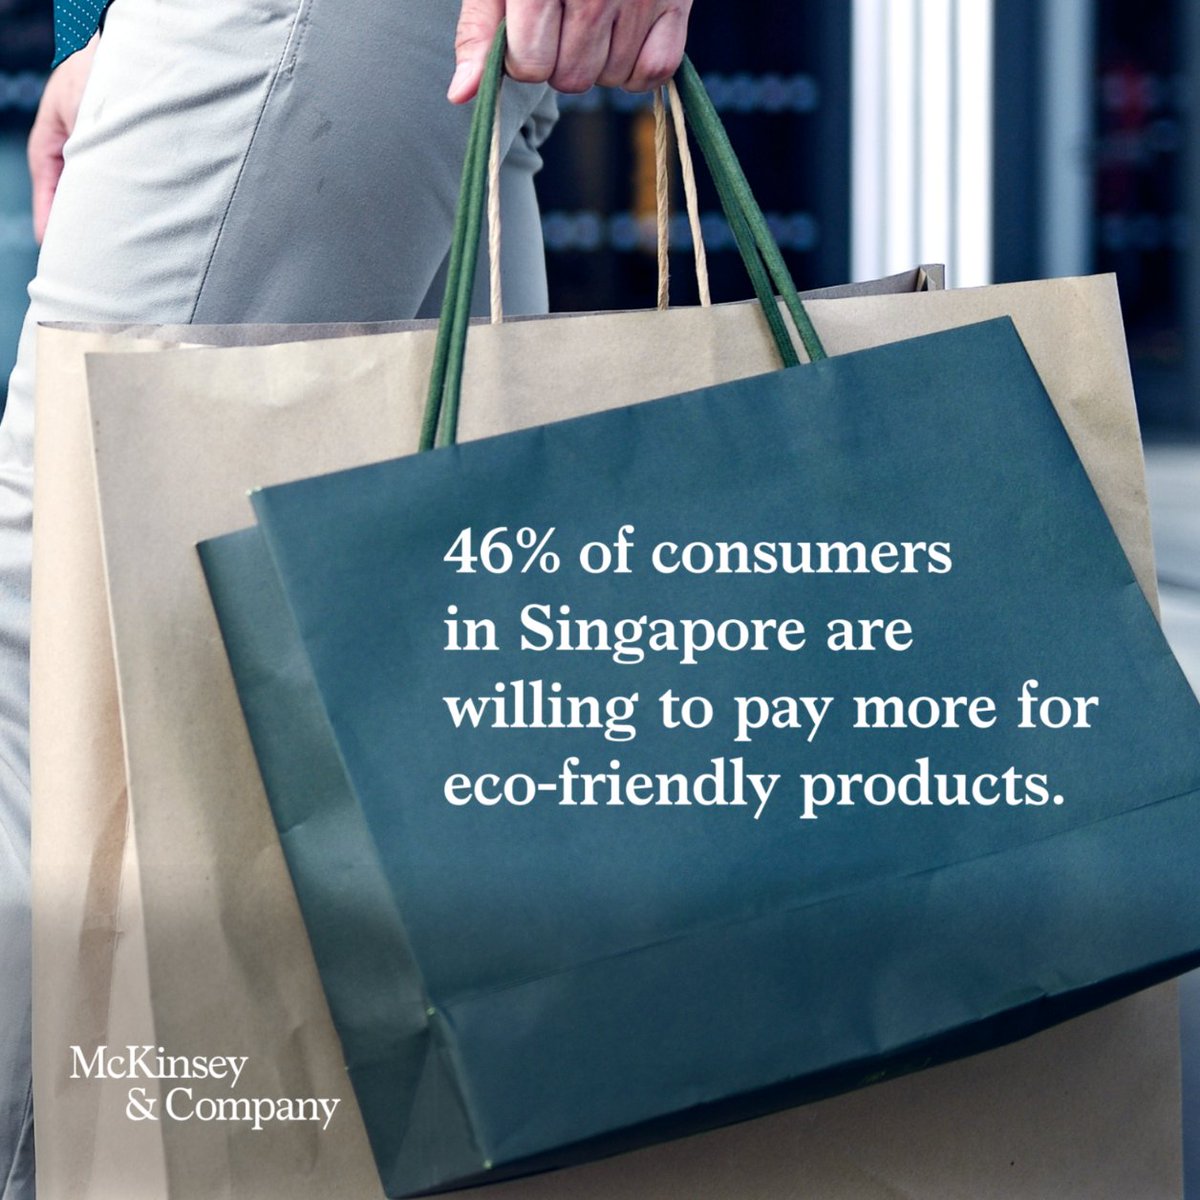 Consumers in Asia are increasingly shifting toward more sustainable products. Discover how CEOs in Asia can reorient their organizations to embed #sustainability objectives across their business in our #StateofOrganizations report: mck.co/StateOfOrgs

#FutureofAsia #FoA